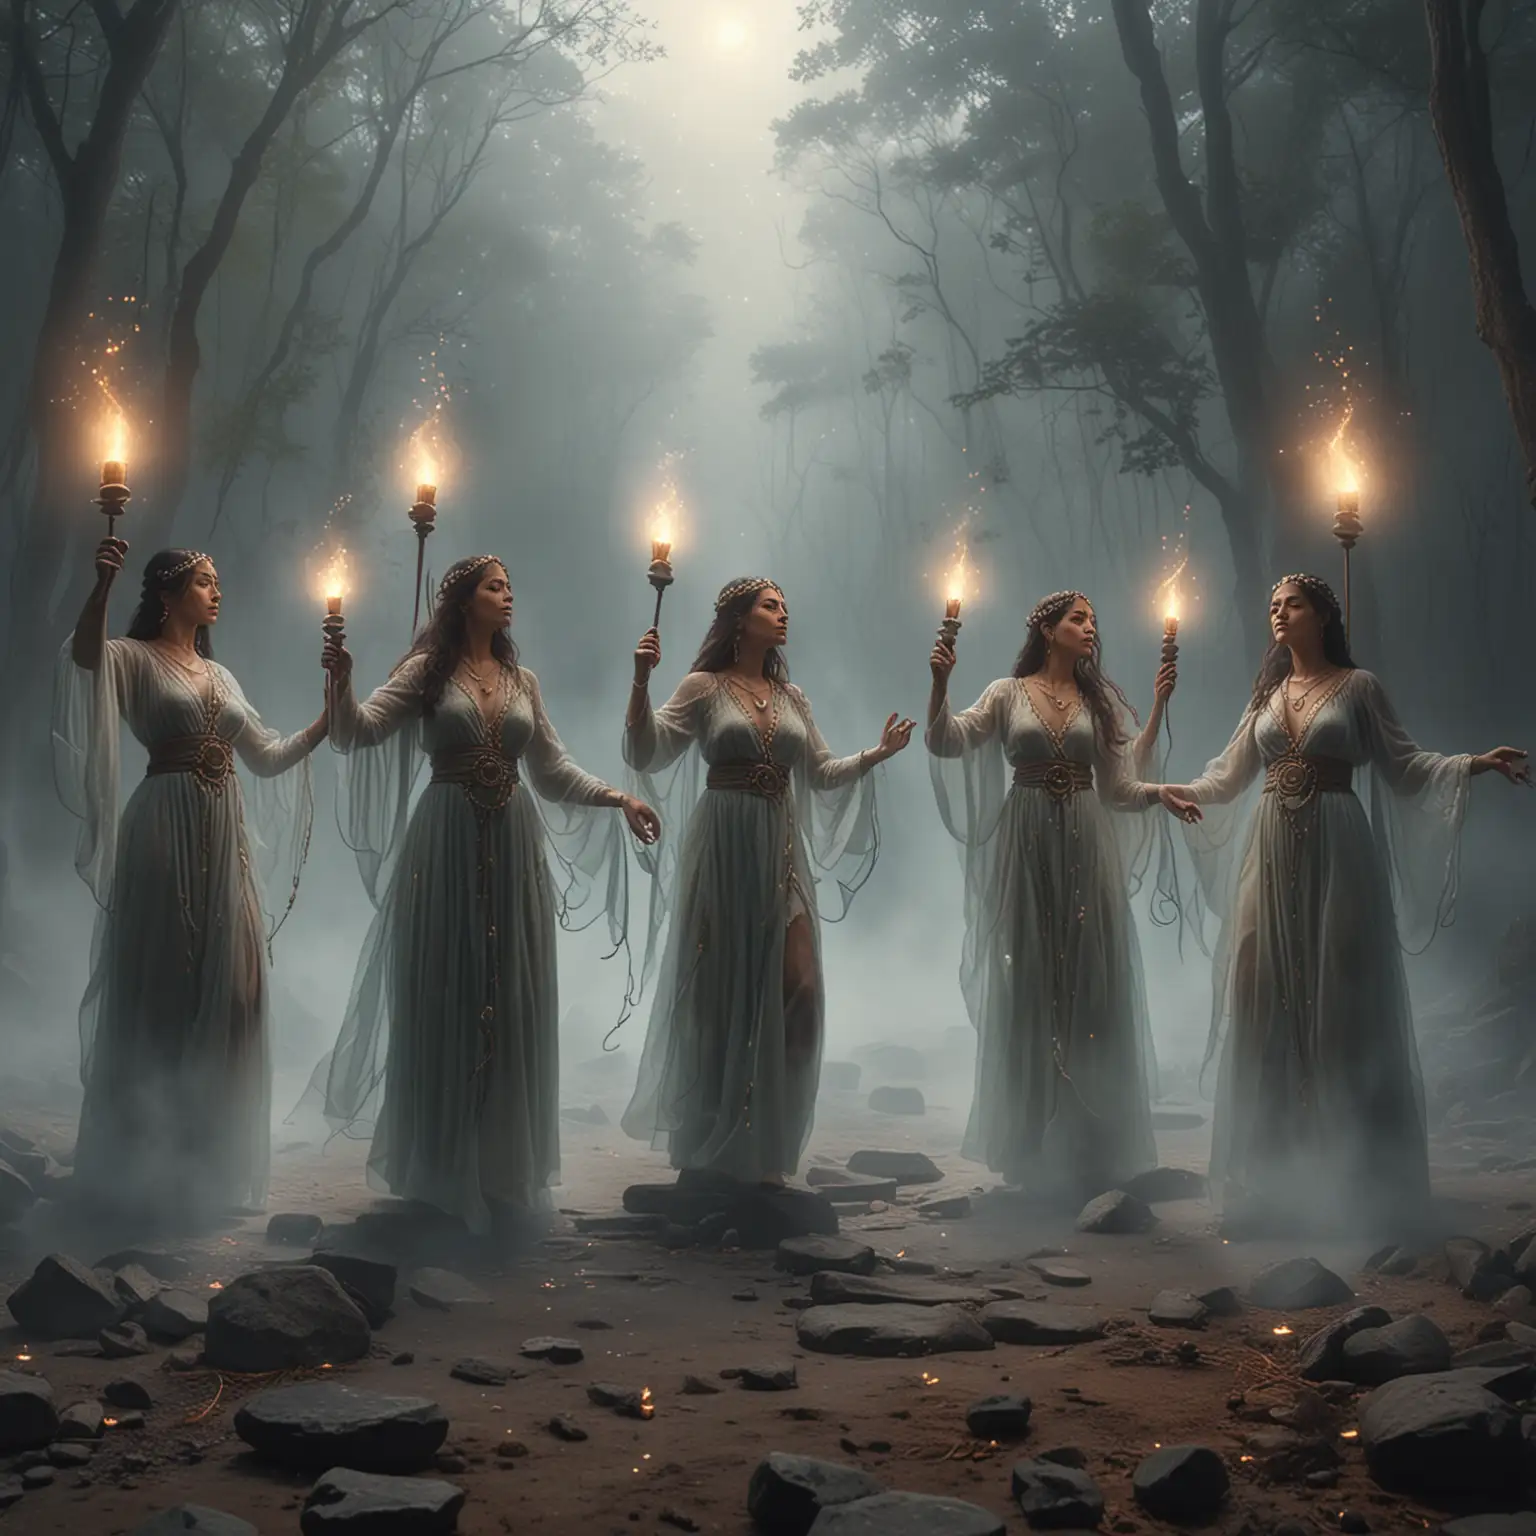 Ethereal Women Dancing with Torches in Stone Circle